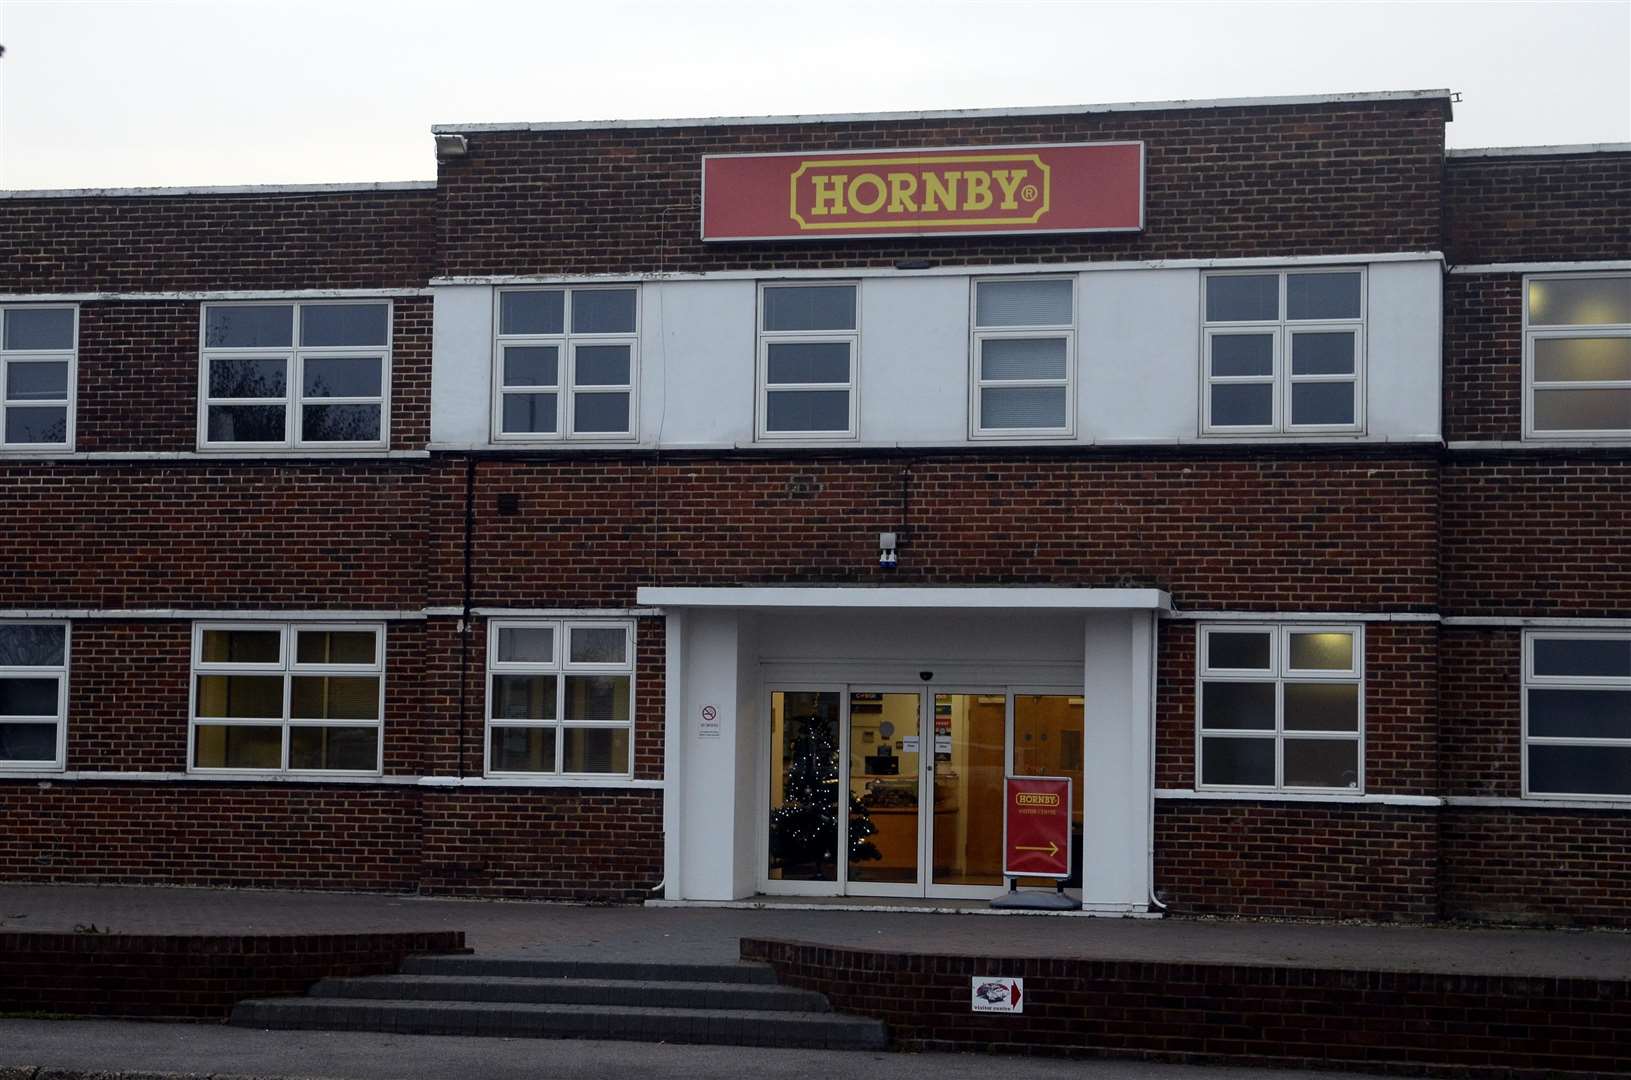 The old Hornby site in Margate. The visitor centre remains, but its HQ is now in Sandwich